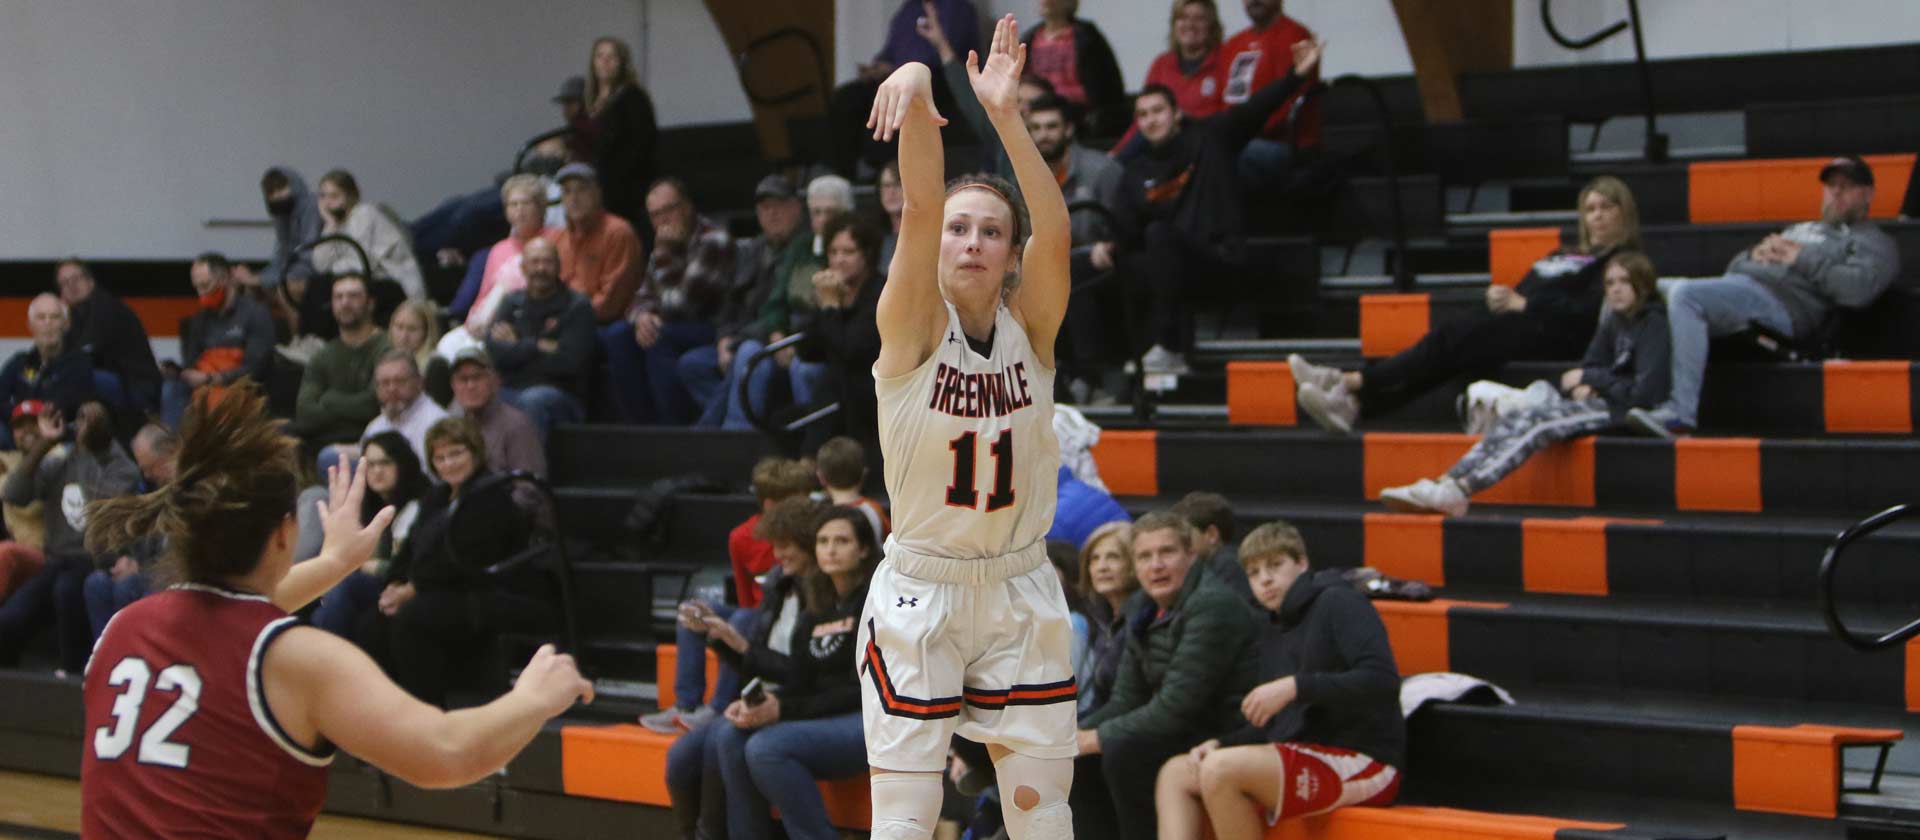 Women's basketball holds Lincoln Christian to 35 points in convincing win